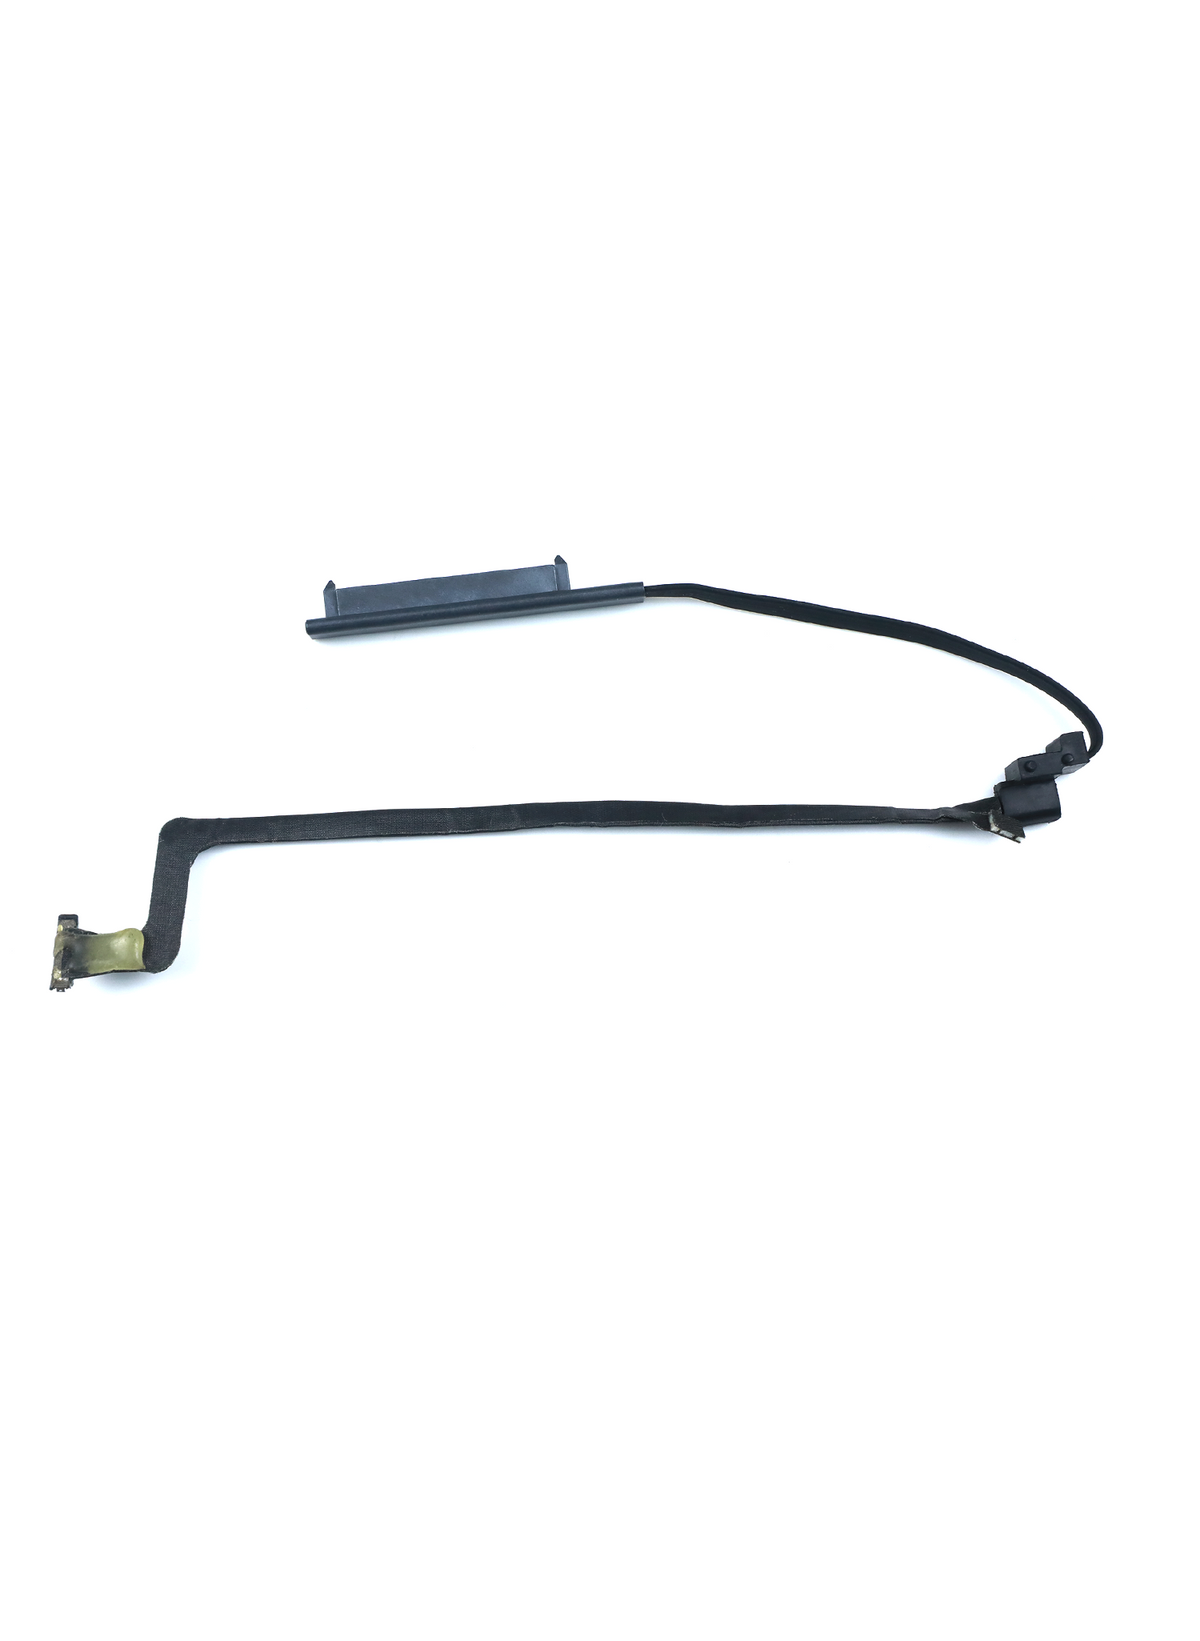 HARD DRIVE CABLE COMPATIBLE FOR MACBOOK UNIBODY 13" A1278 (LATE 2008)